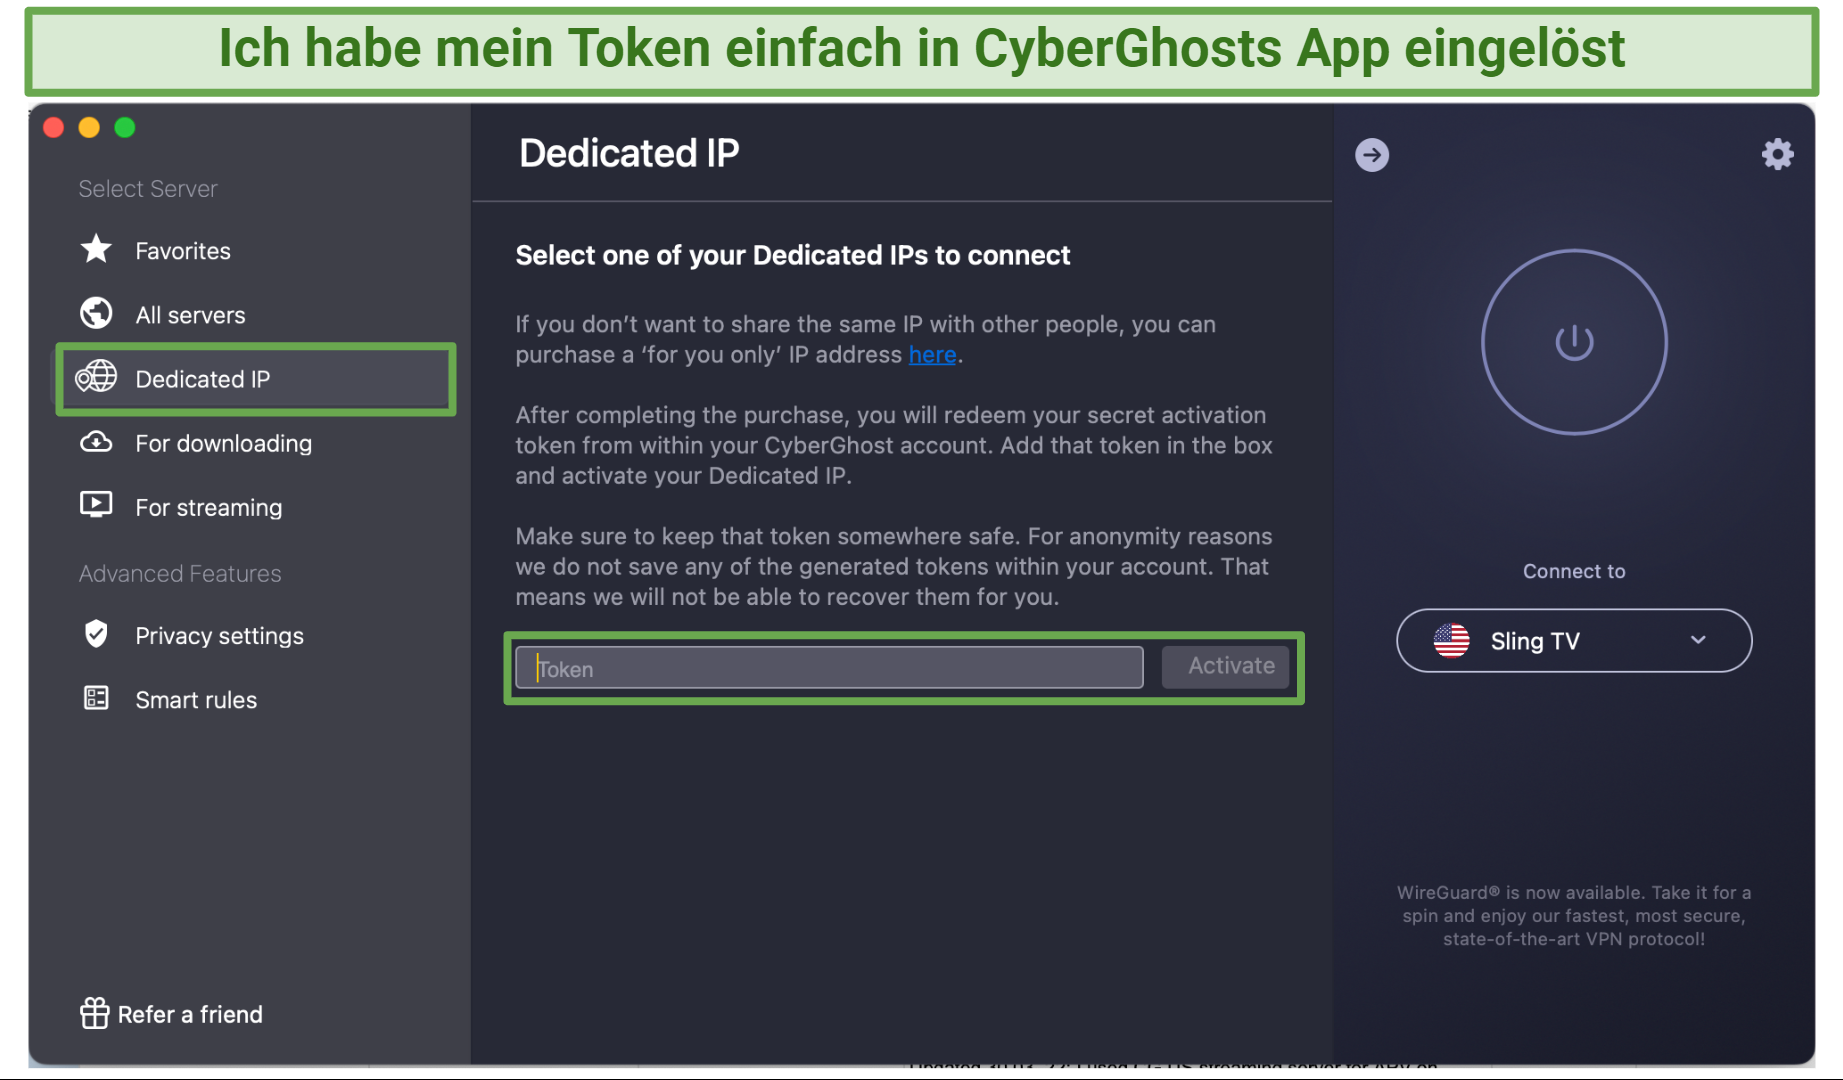 A screenshot of CyberGhost's macOS app showing where you can redeem your token to receive a dedicated IP